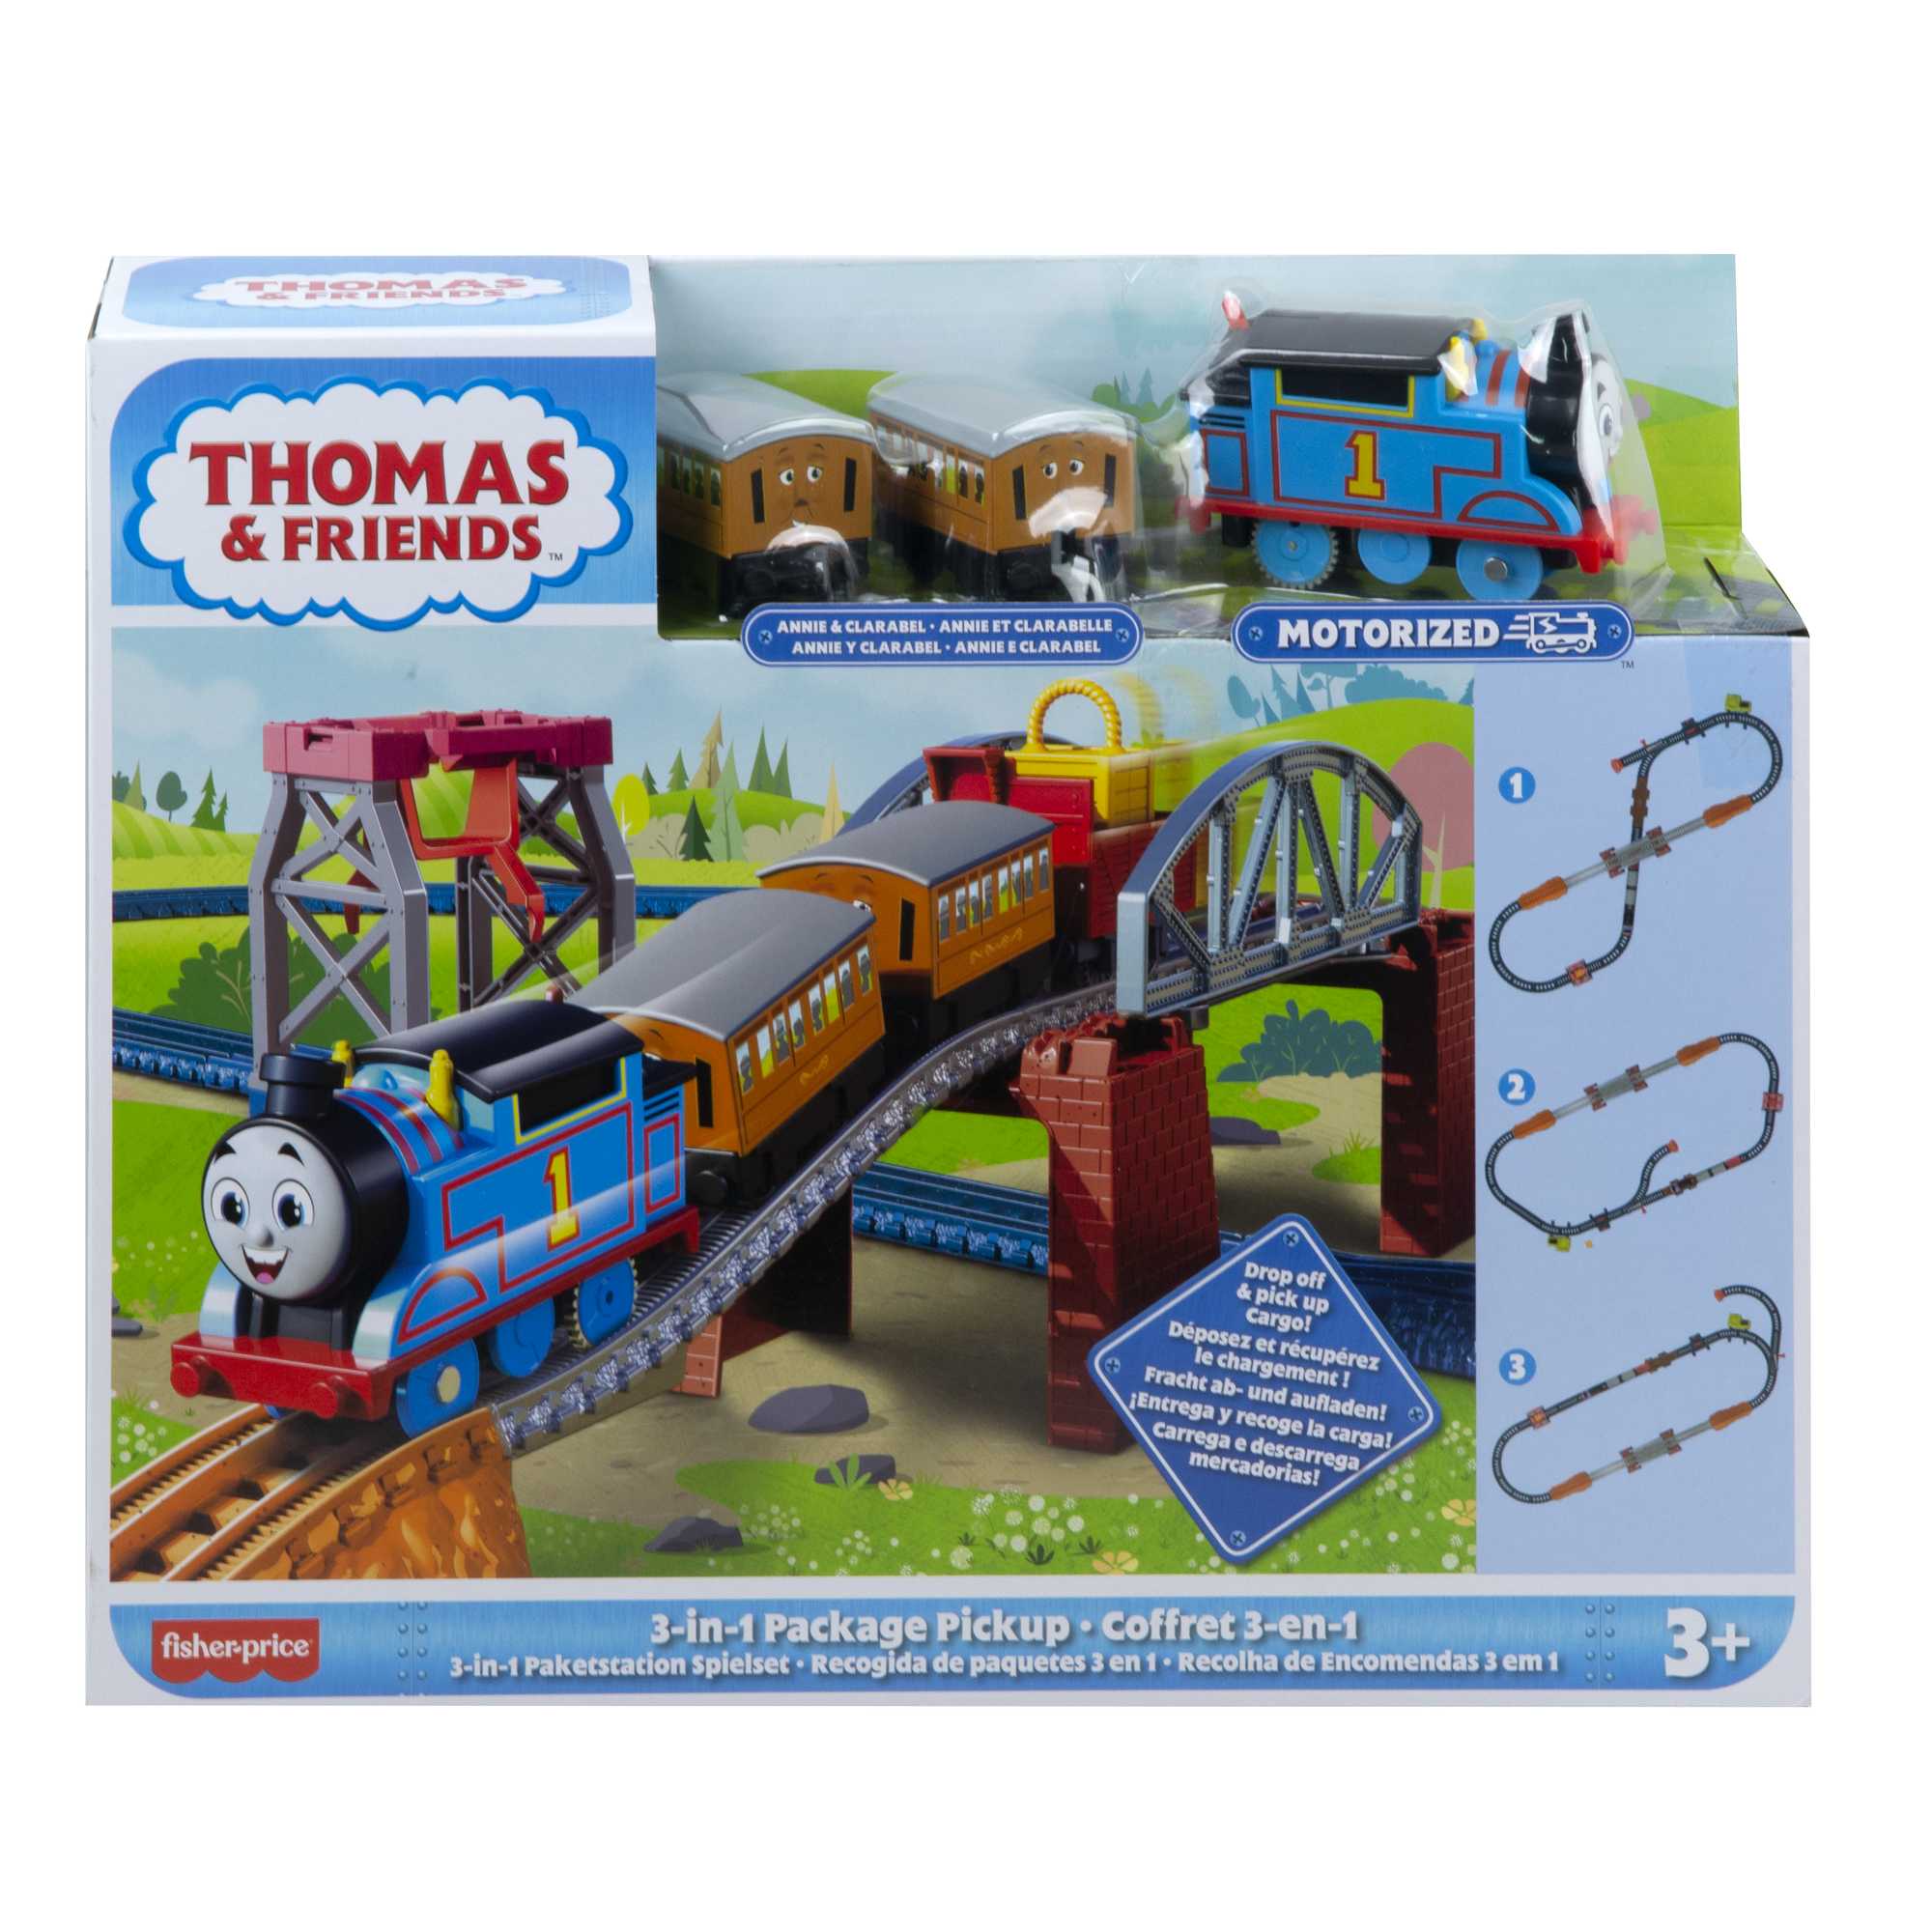 Fisher Price-Thomas & Friends - 3-In-1 Package Pickup-HGX64-Legacy Toys